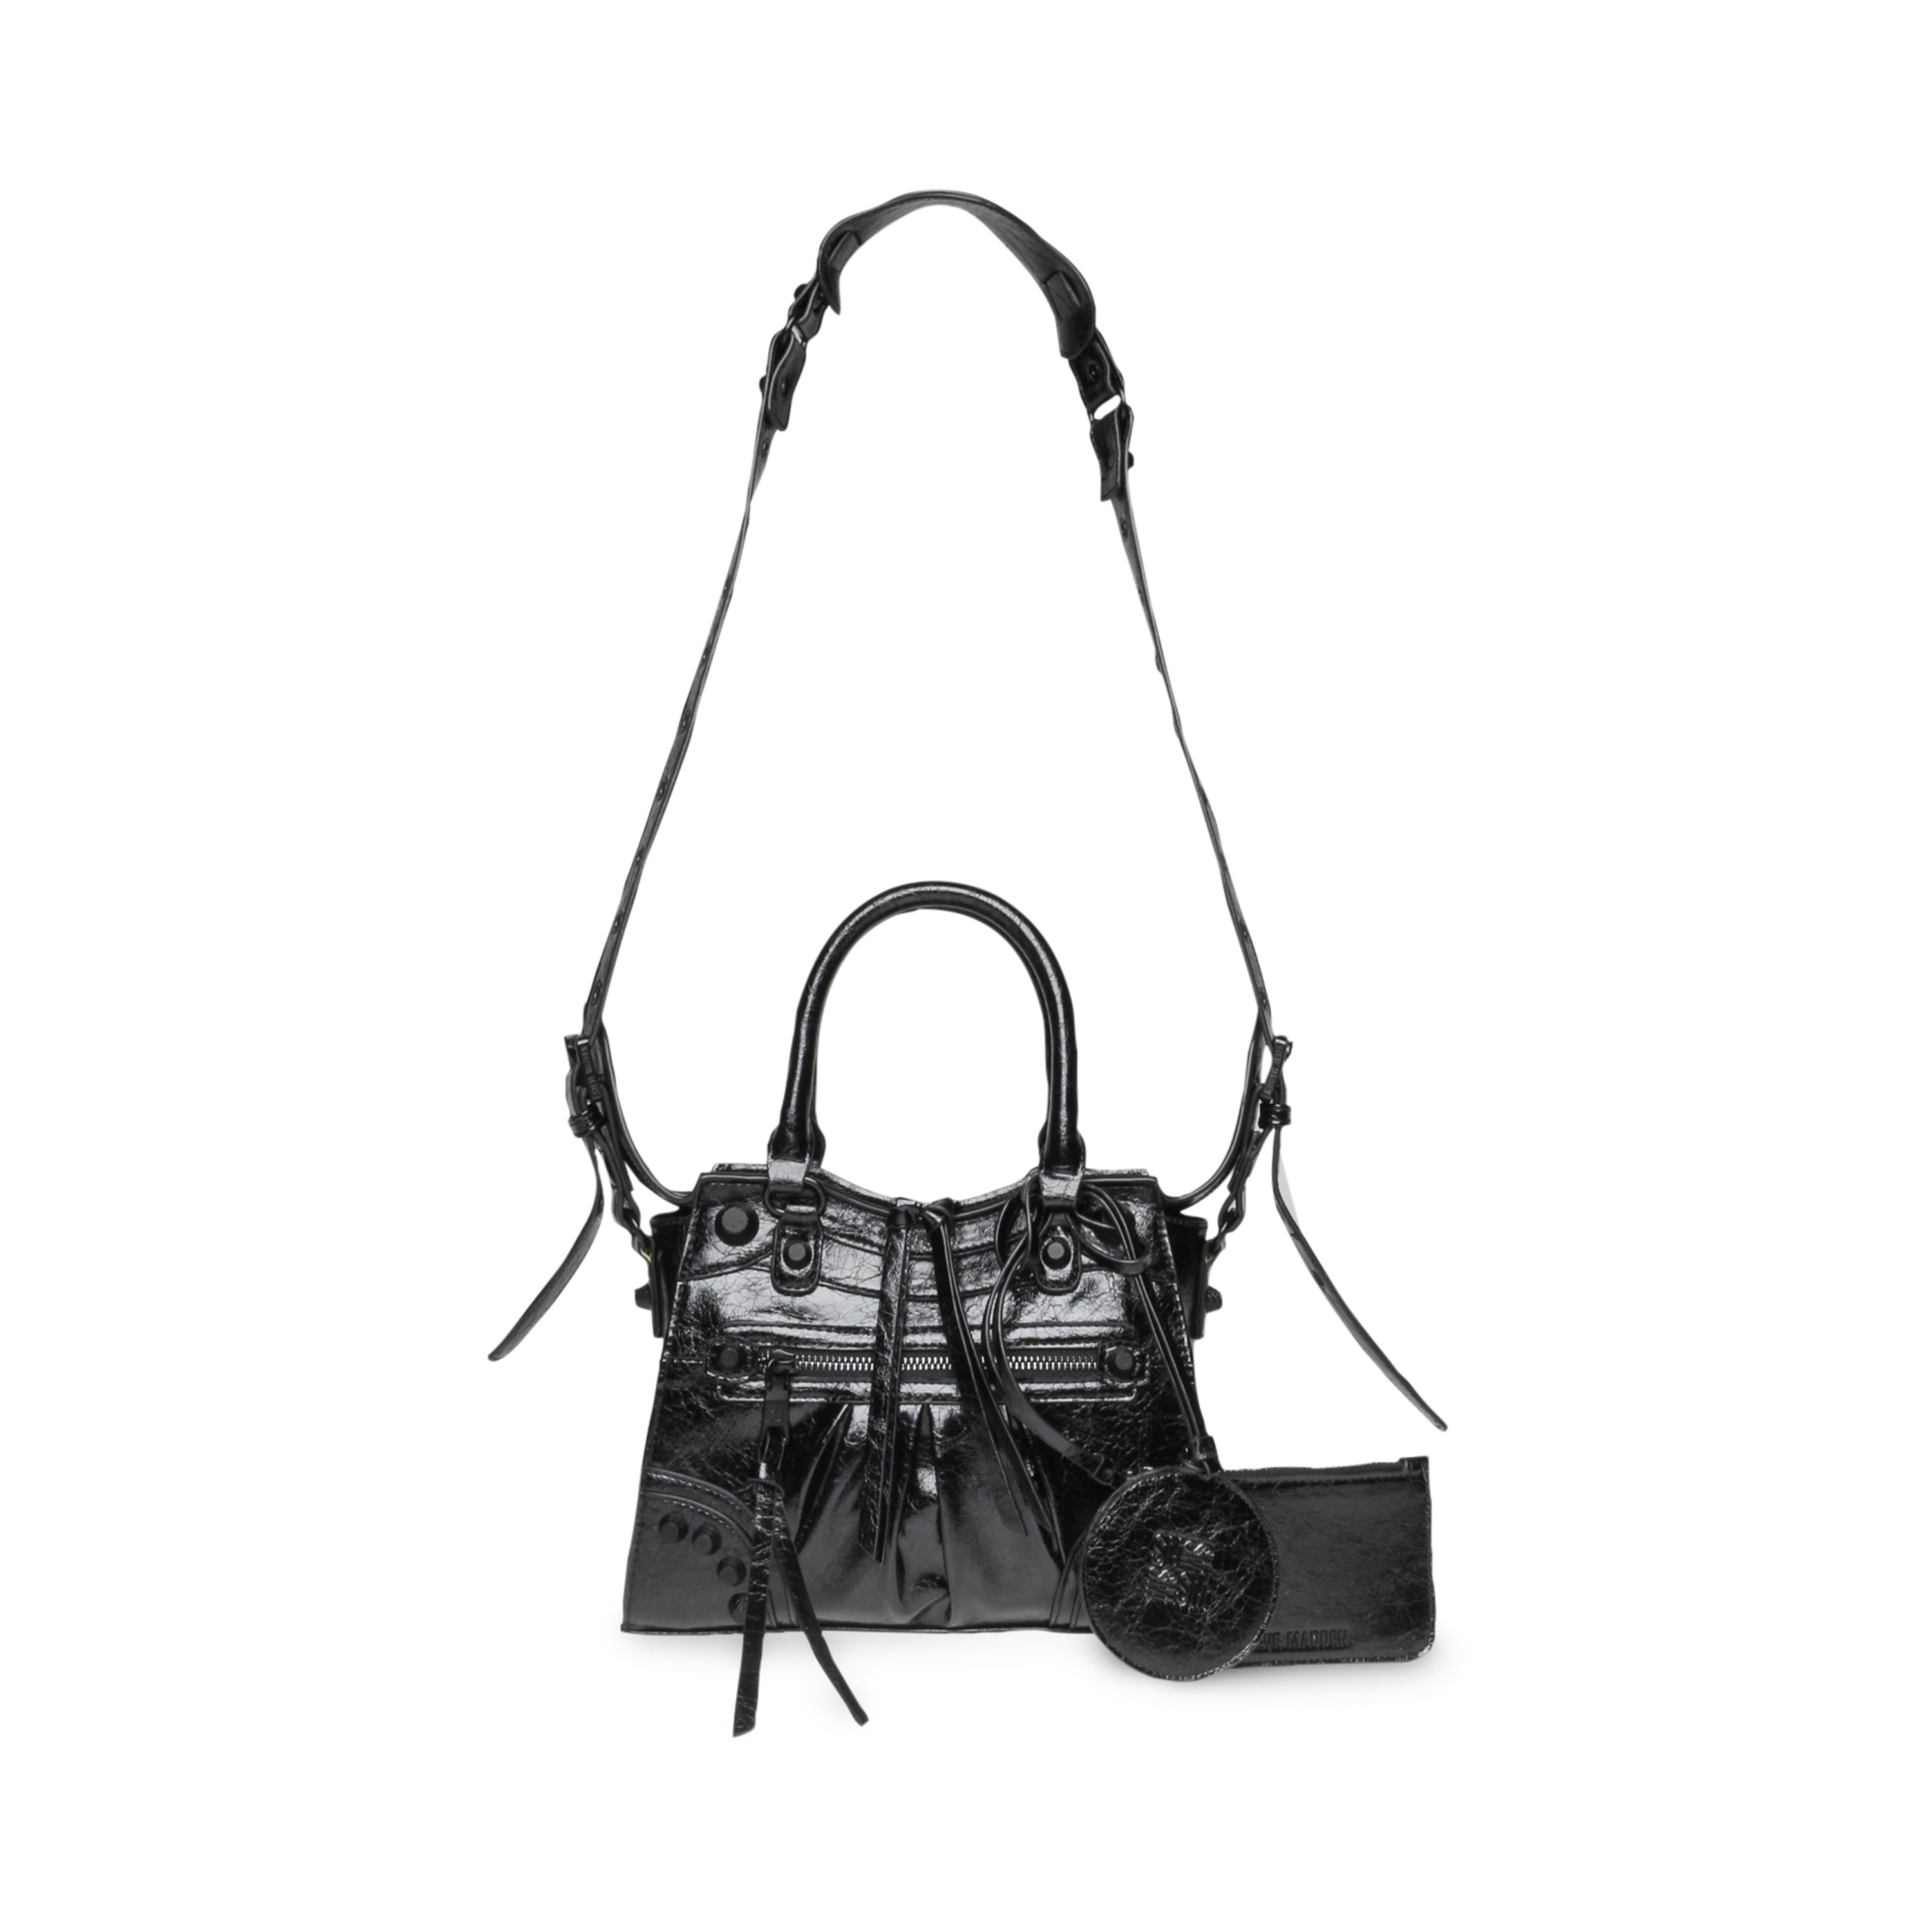 Stevemadden Womens Designer Black Leather Shoulder Bag Set Out With Bucket  Hat And Glasses From Verygoodbags, $31.81 | DHgate.Com